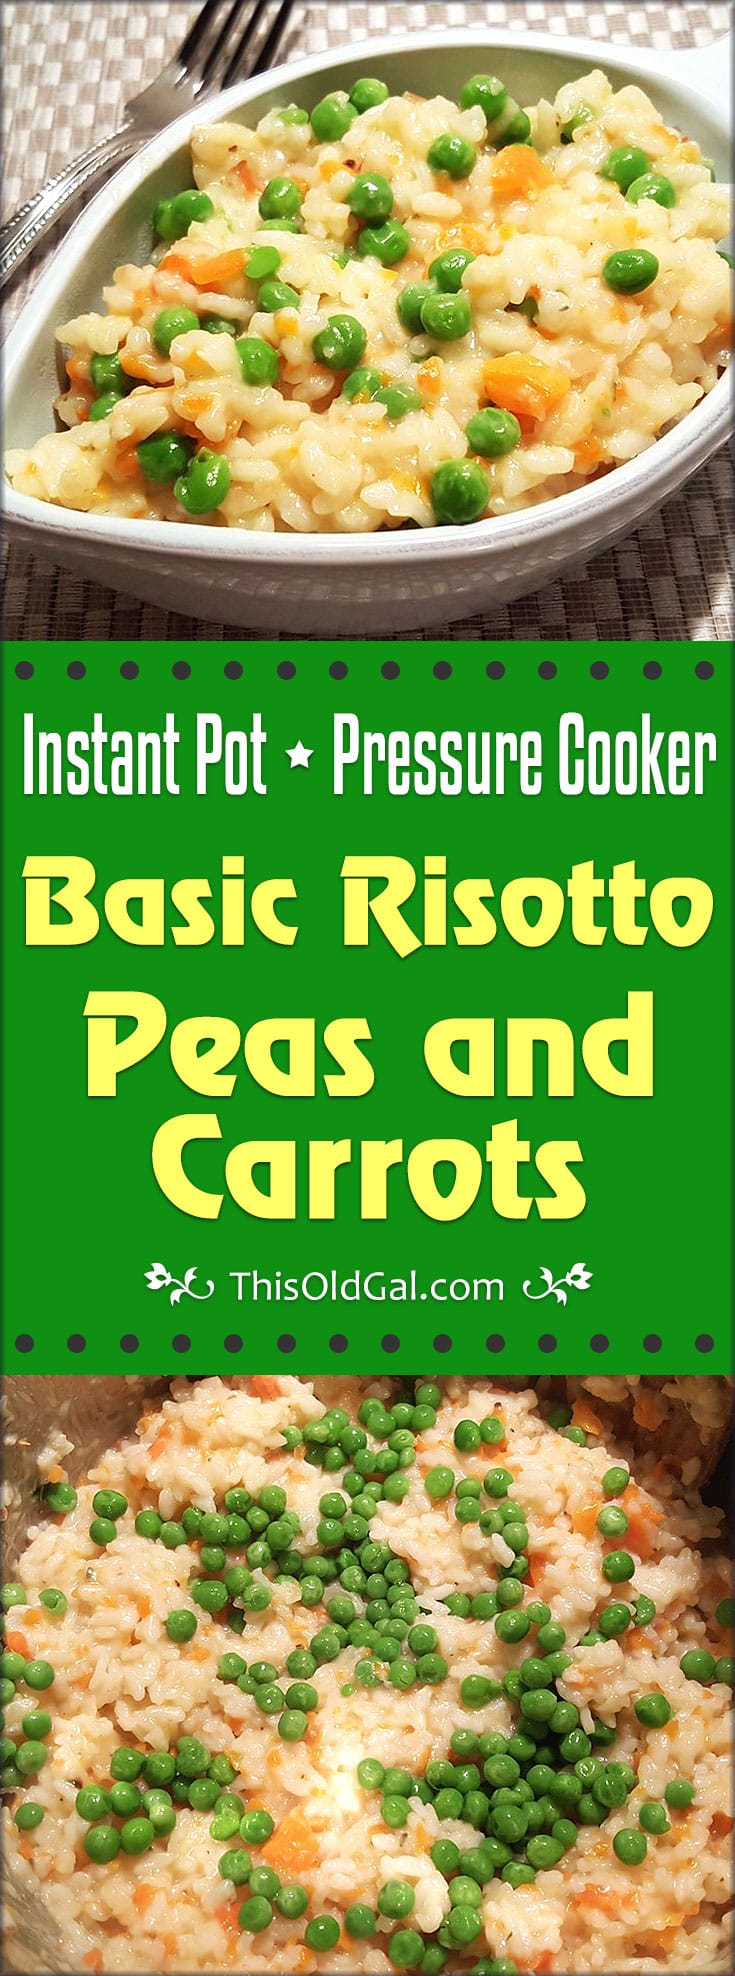 Pressure Cooker Basic Risotto Recipe with Peas and Carrots